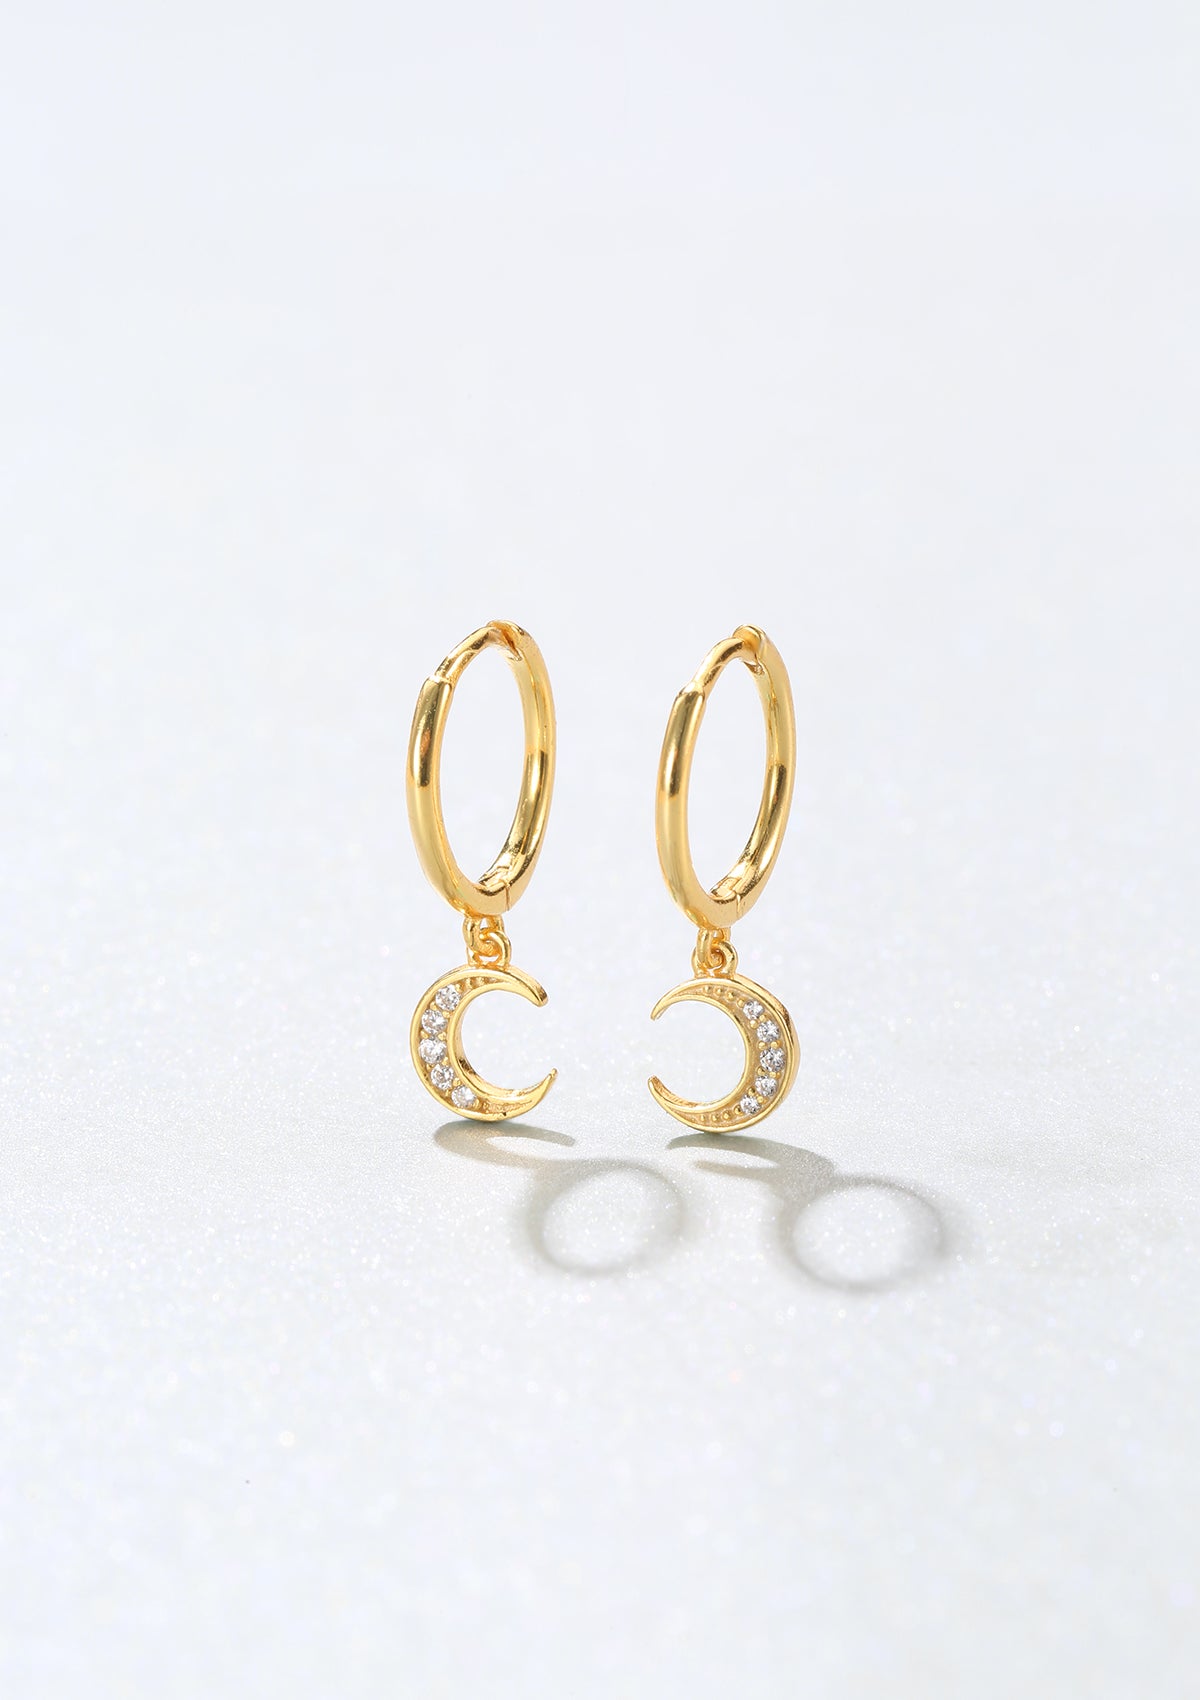 Crescent Moon Huggie Earrings Sterling Silver Gold